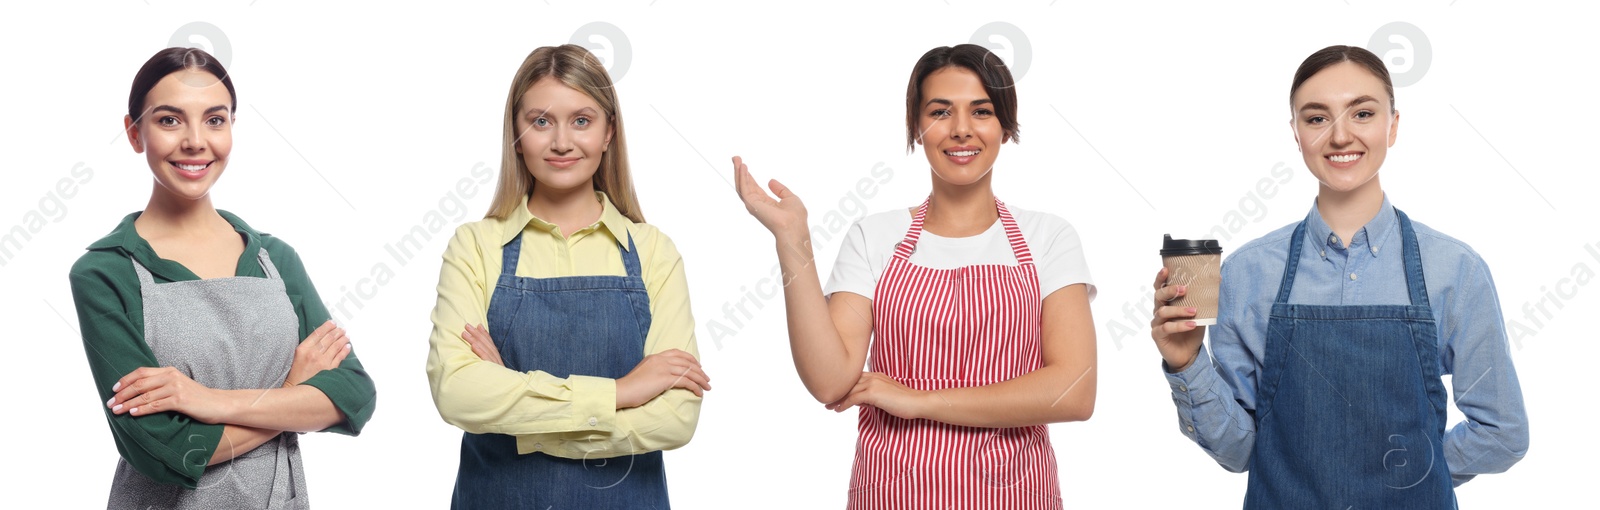 Image of Collage with photos of women in aprons on white background